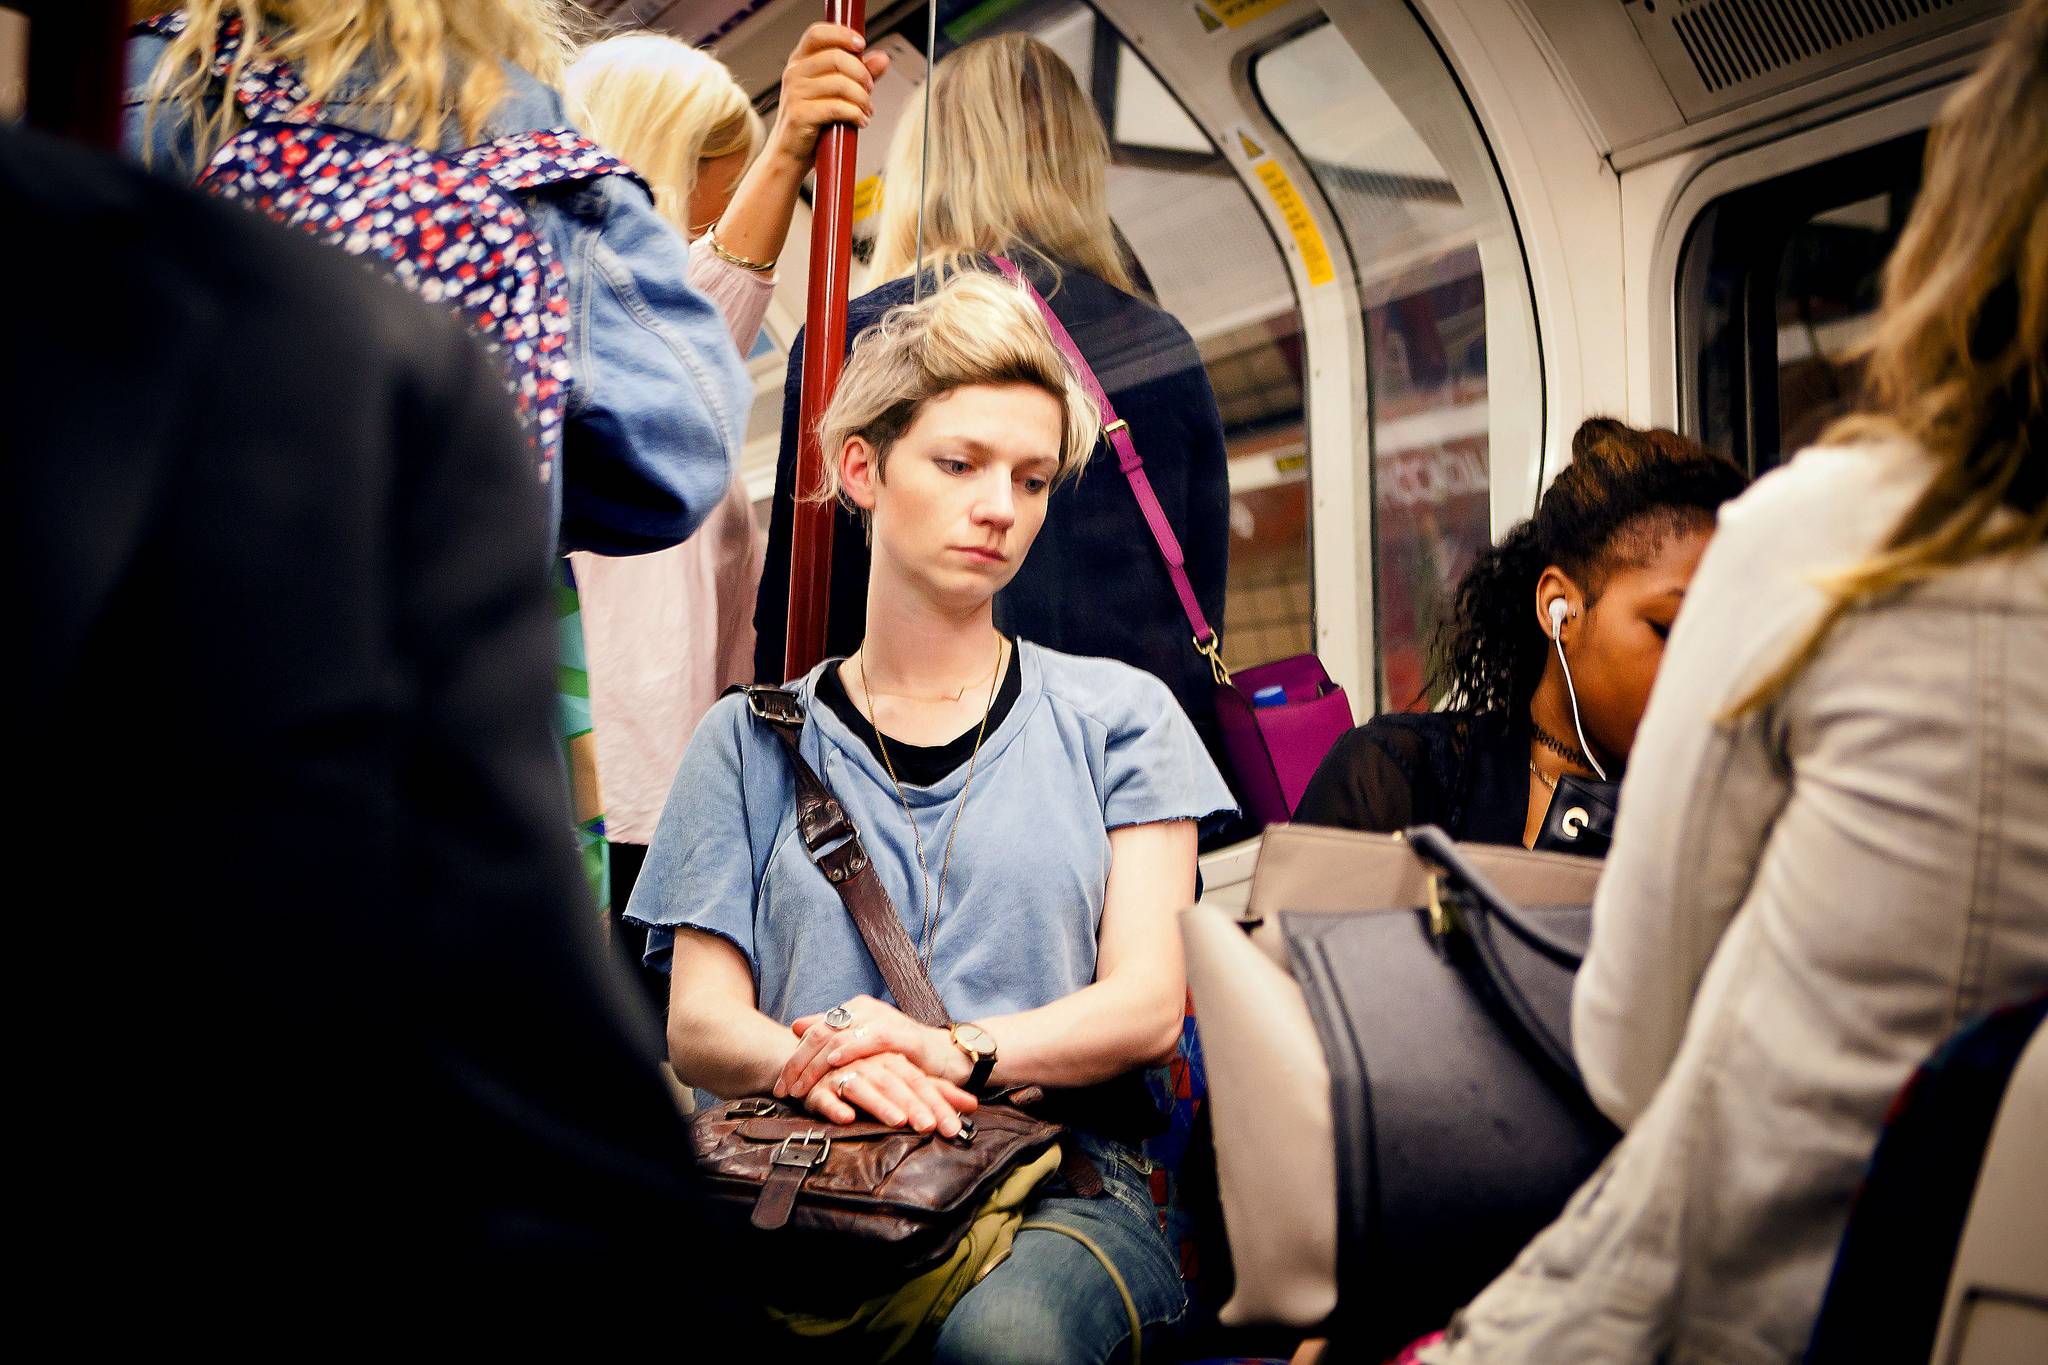 Londoners are averse to talking to strangers